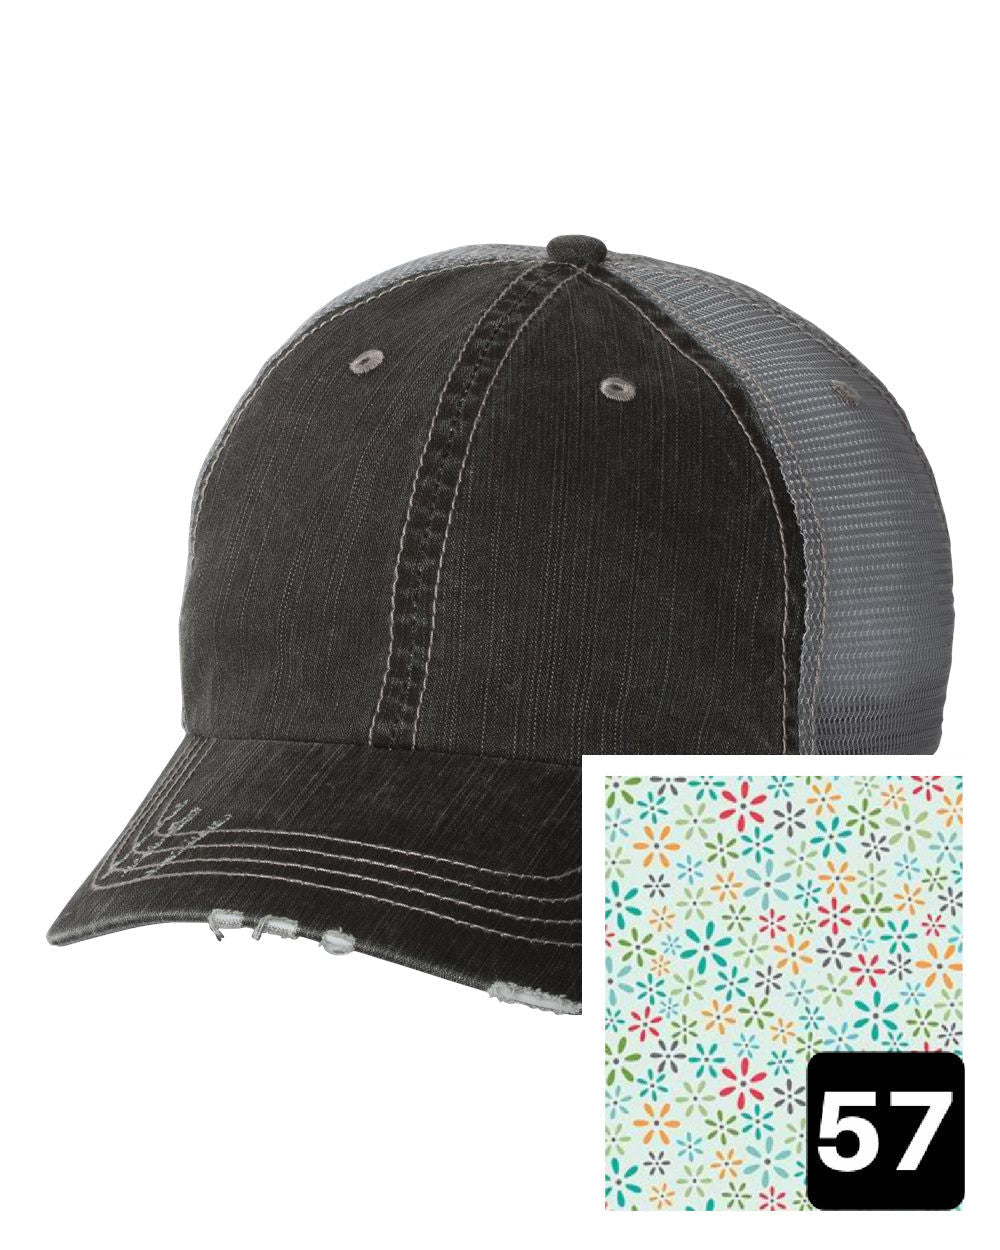 gray distressed trucker hat with white daisy on yellow fabric state of Tennessee